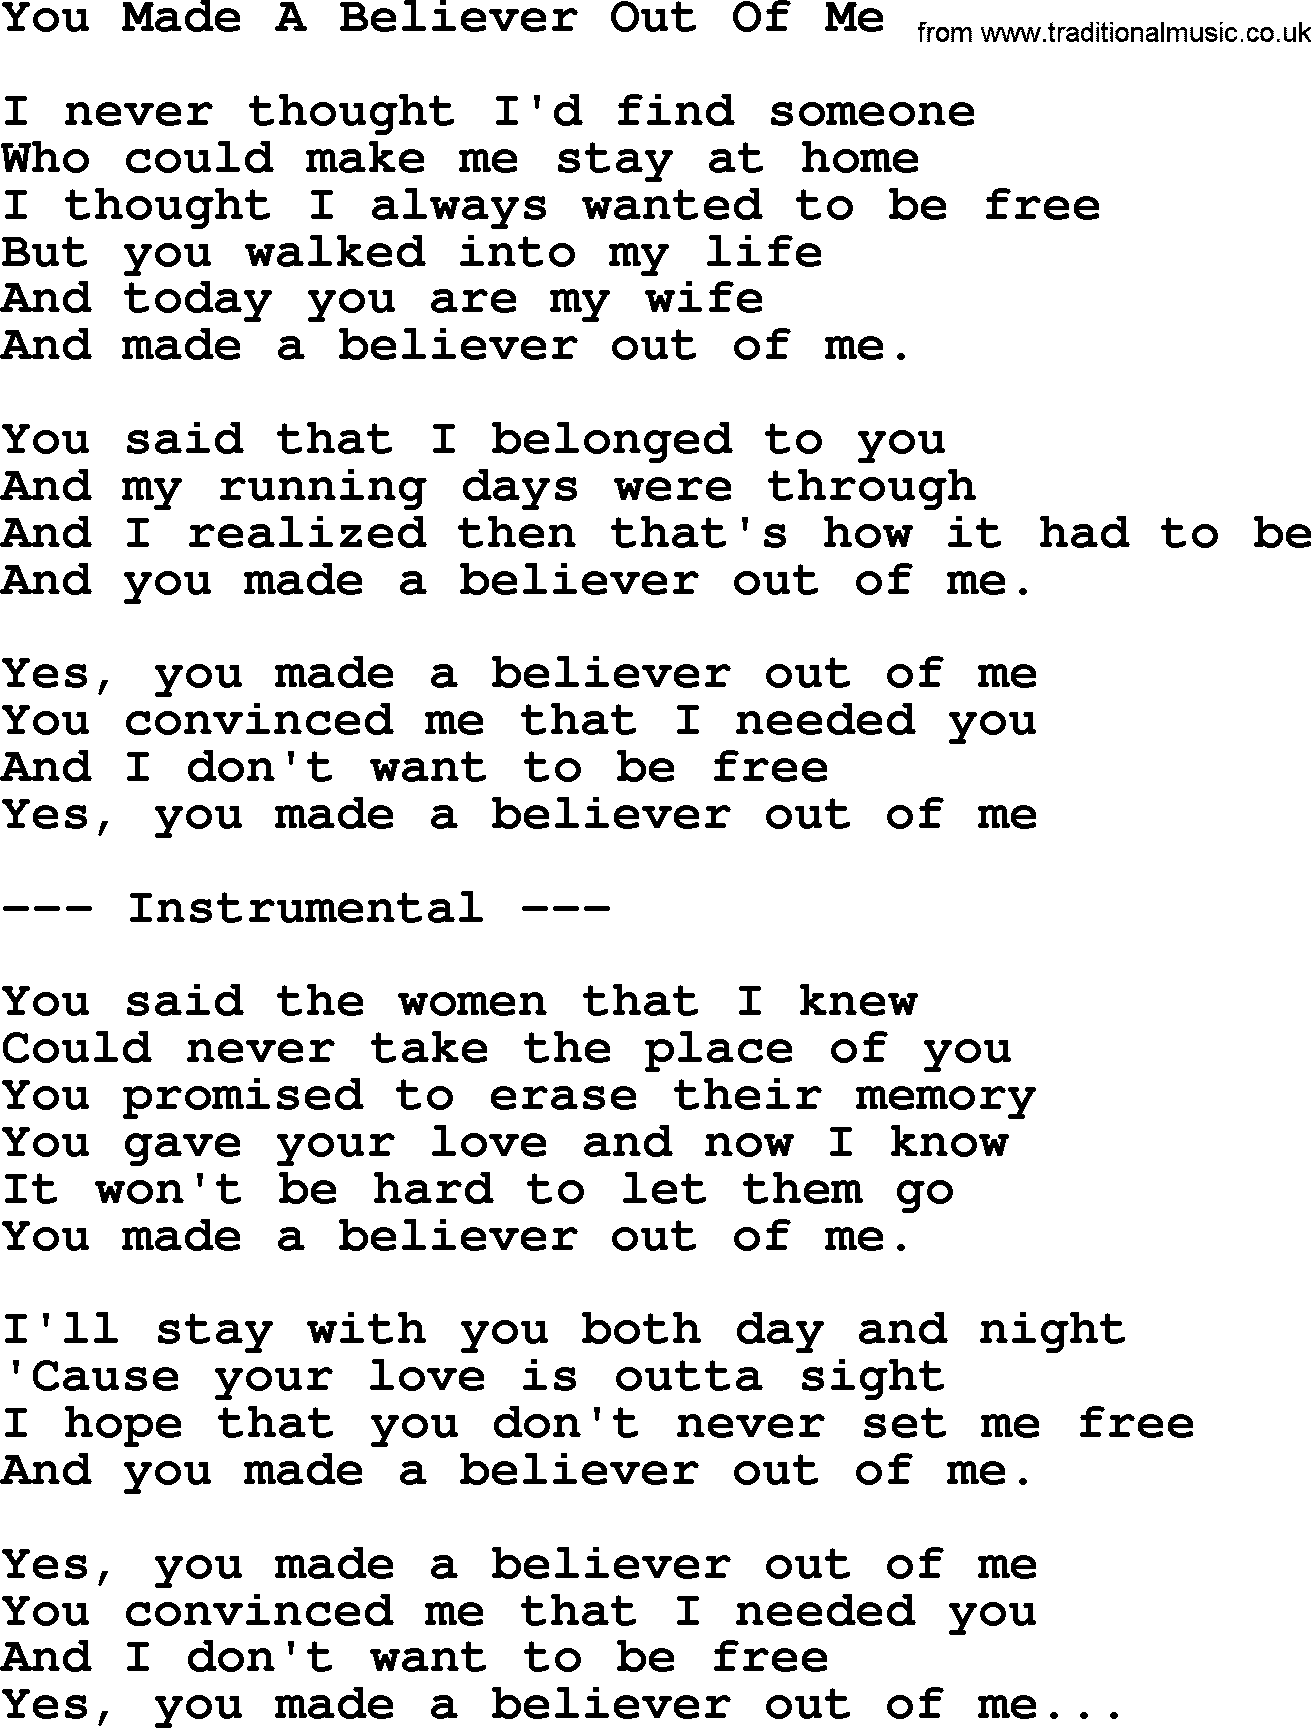 George Jones song: You Made A Believer Out Of Me, lyrics